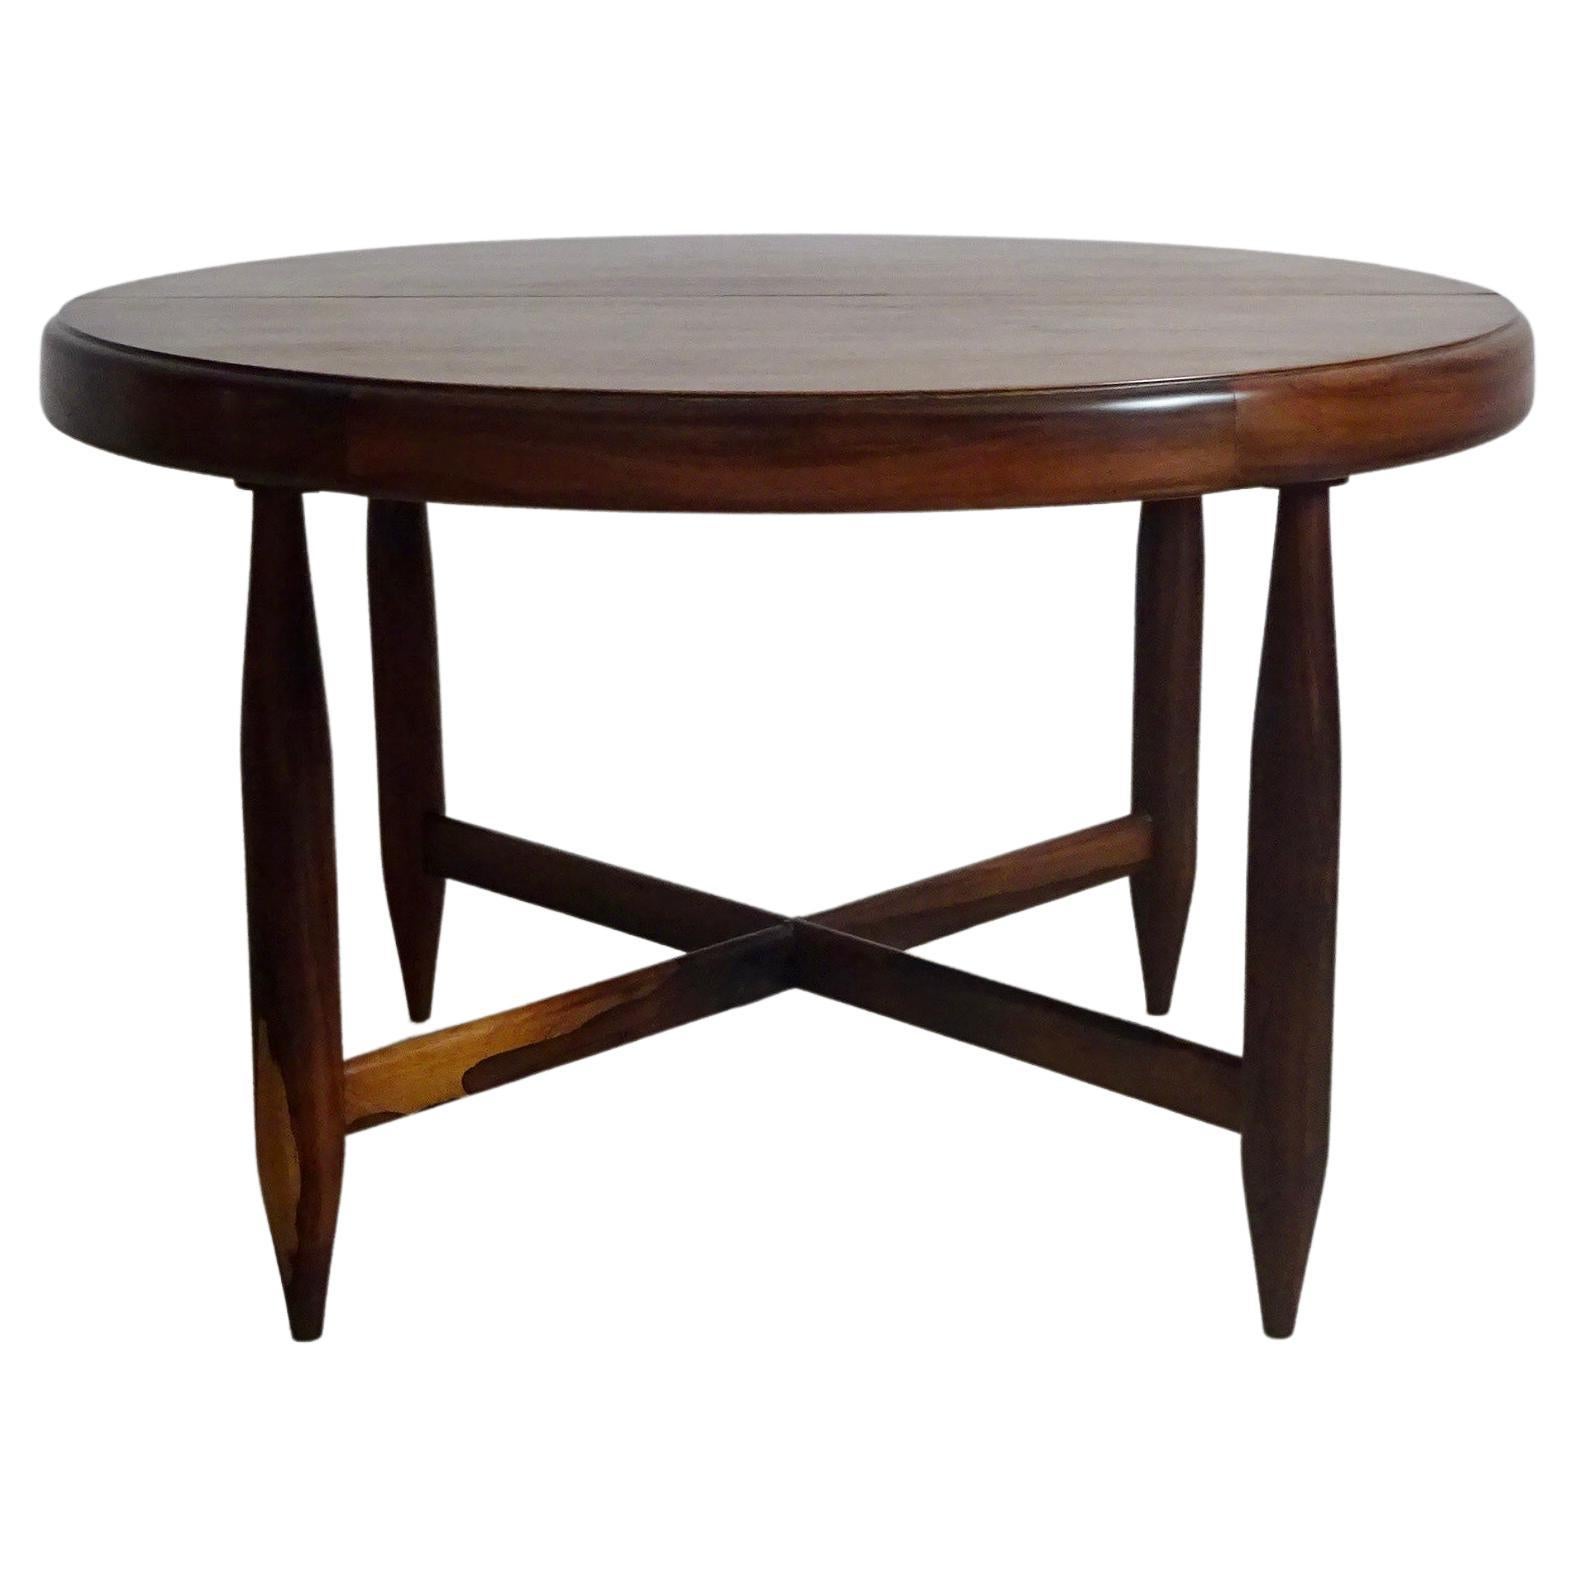 Mid-Century Modern Dining Table by Jorge Jabour Mauad, Brazil, 1960s For Sale